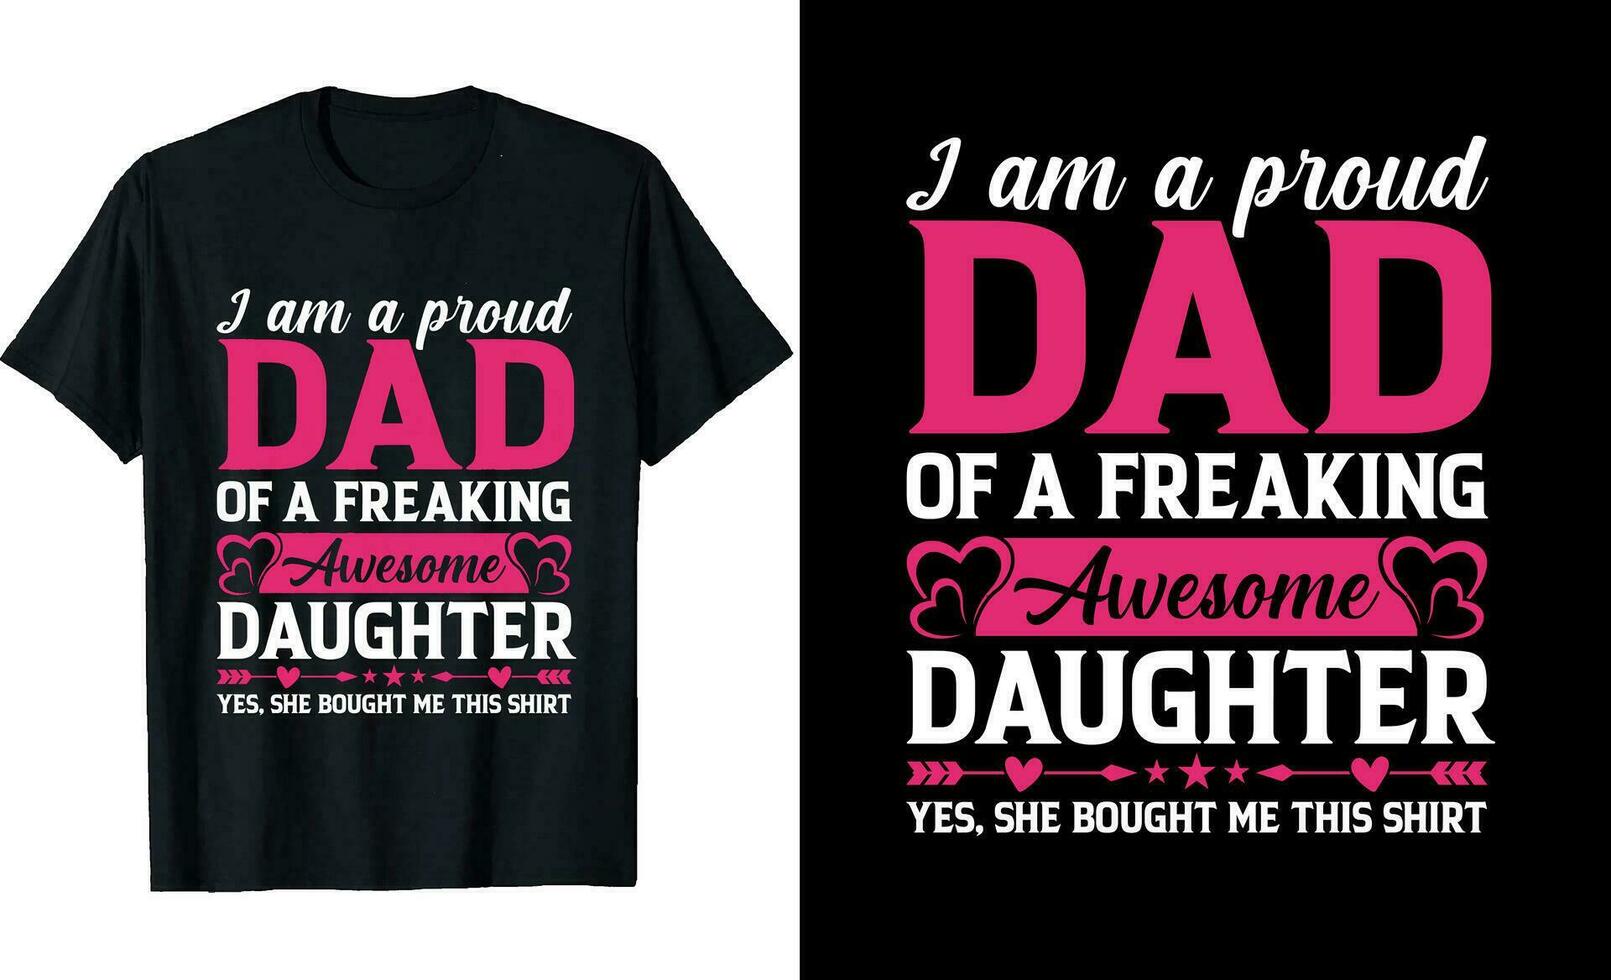 Dad's tshirt design i'm a proud dad of a freaking awesome daughter yes she bought me this shirt vector